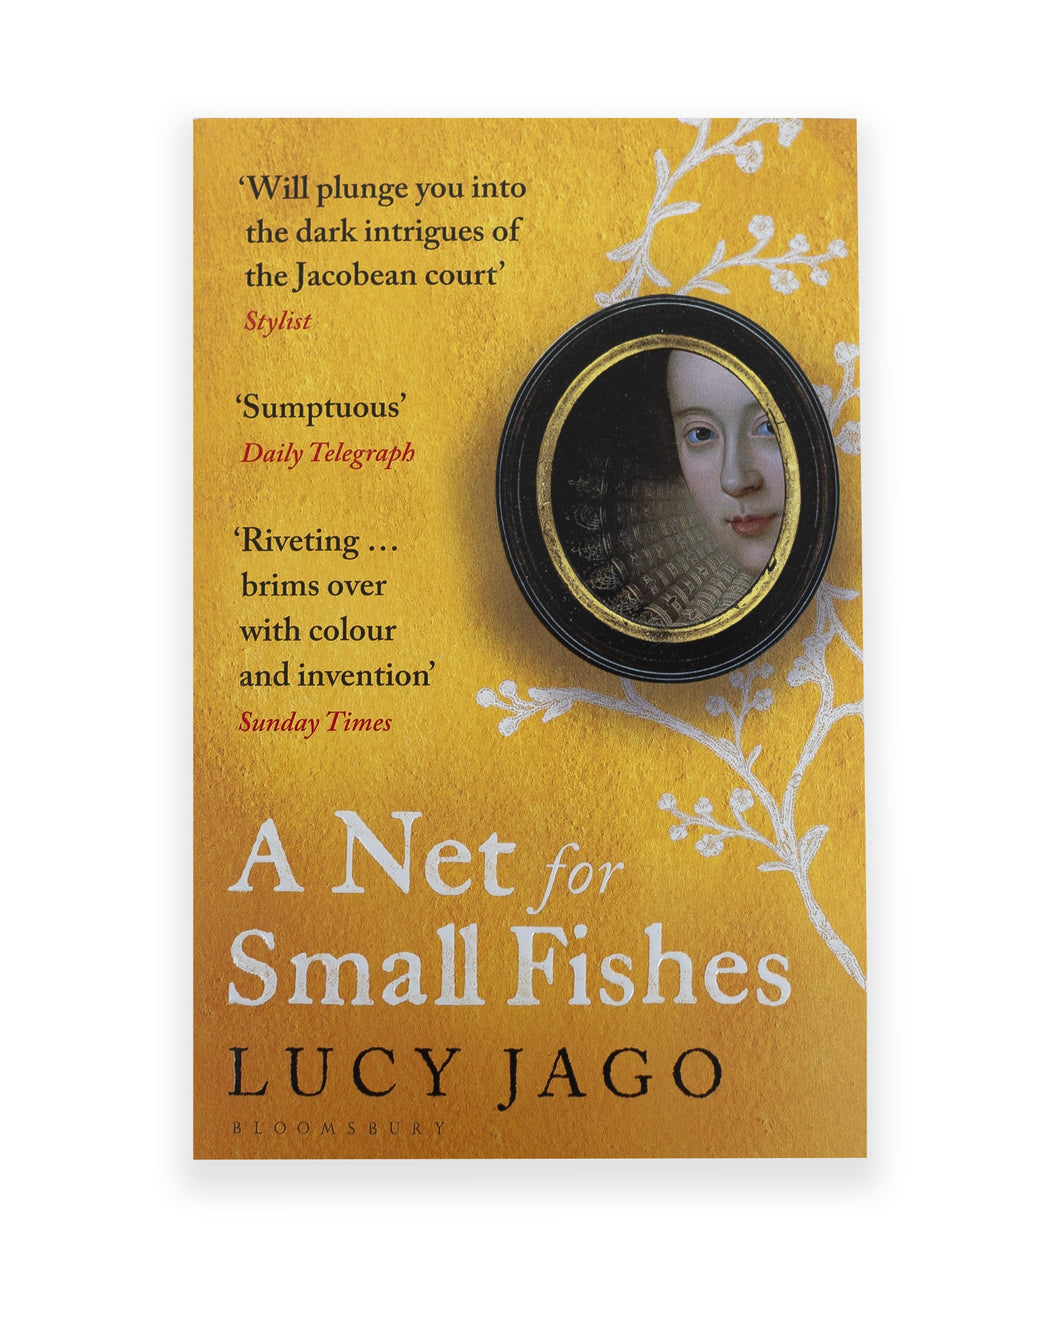 Lucy Jago - A Net for Small Fishes front cover